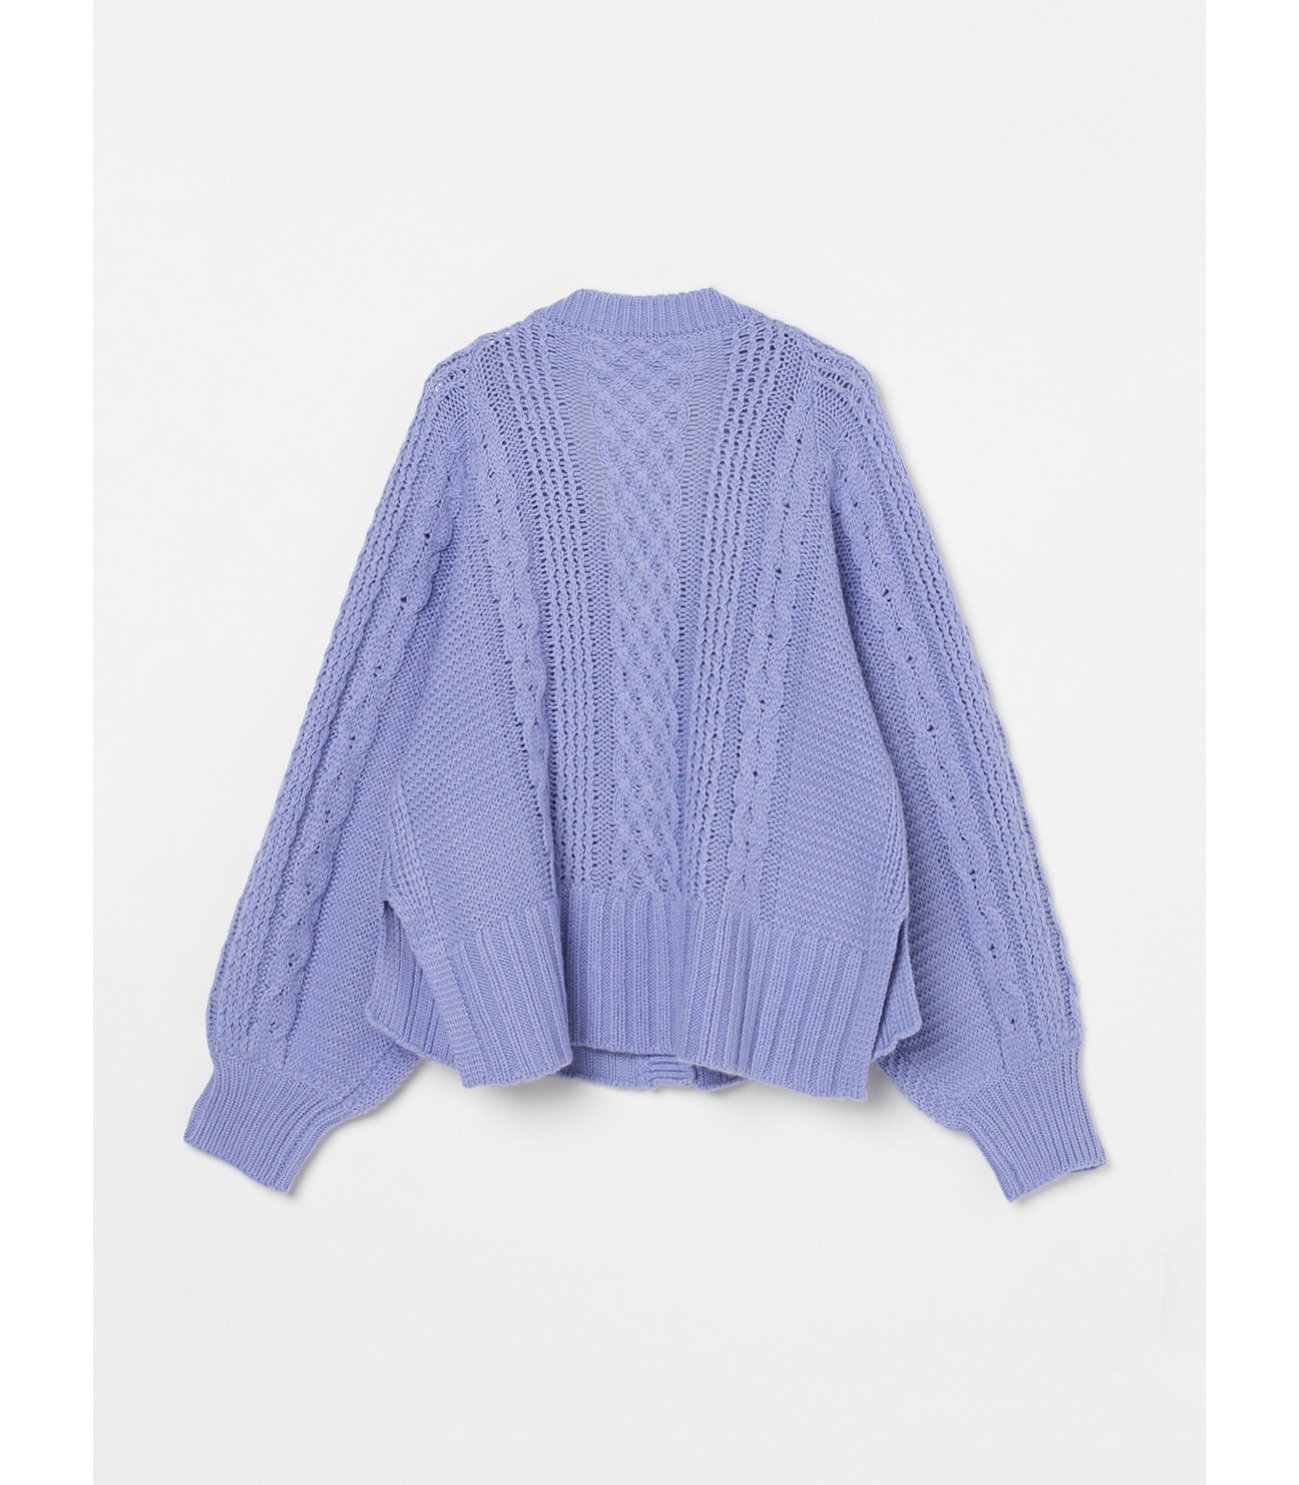 Bulky sweater l/s cable cardy 詳細画像 purple 1